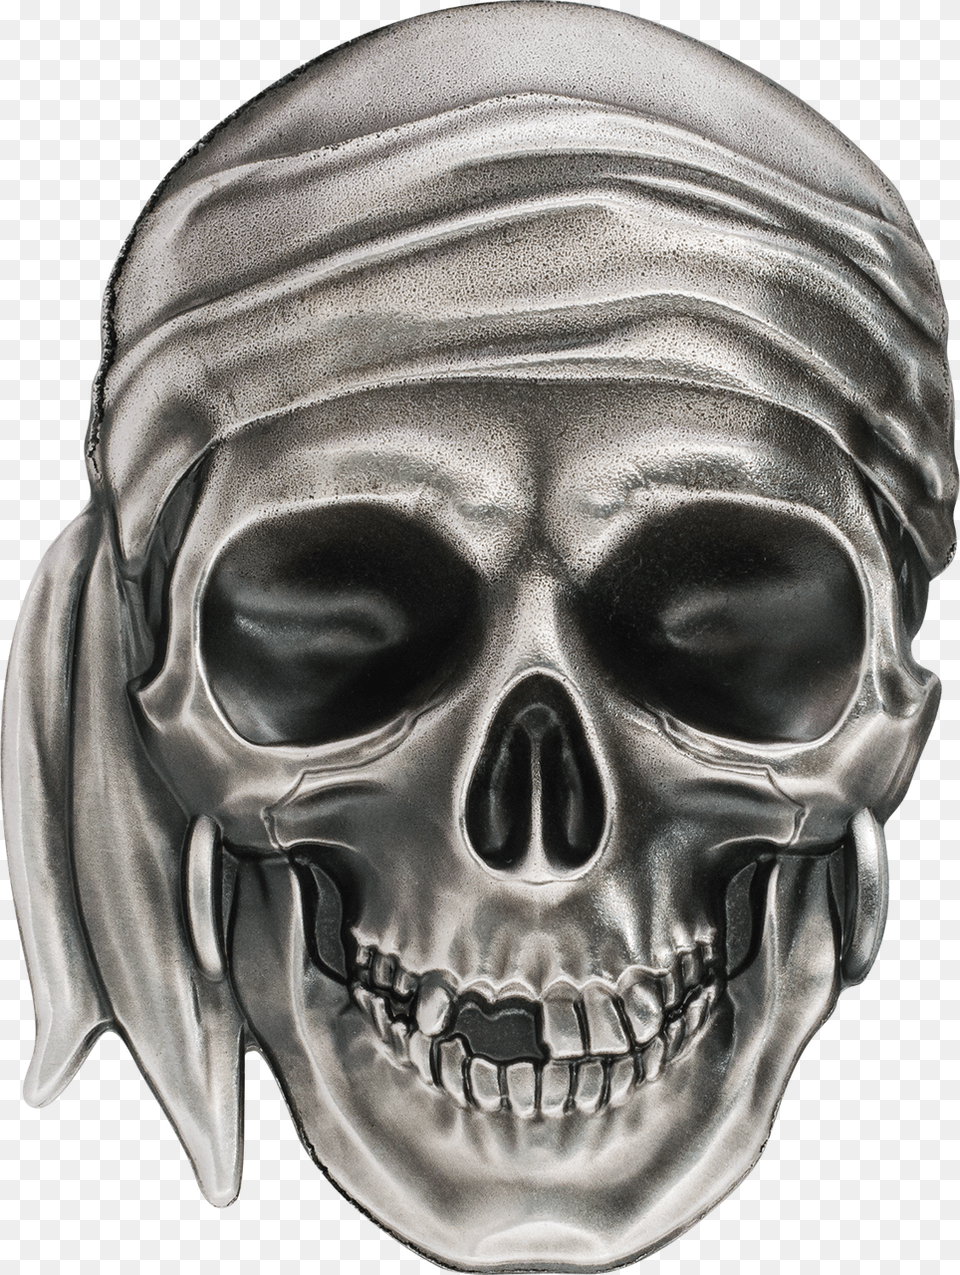 Skulls Transparent Pirate Palau 2017 Pirate Skull Antique Finish Silver Coin, Person, Head, Face Png